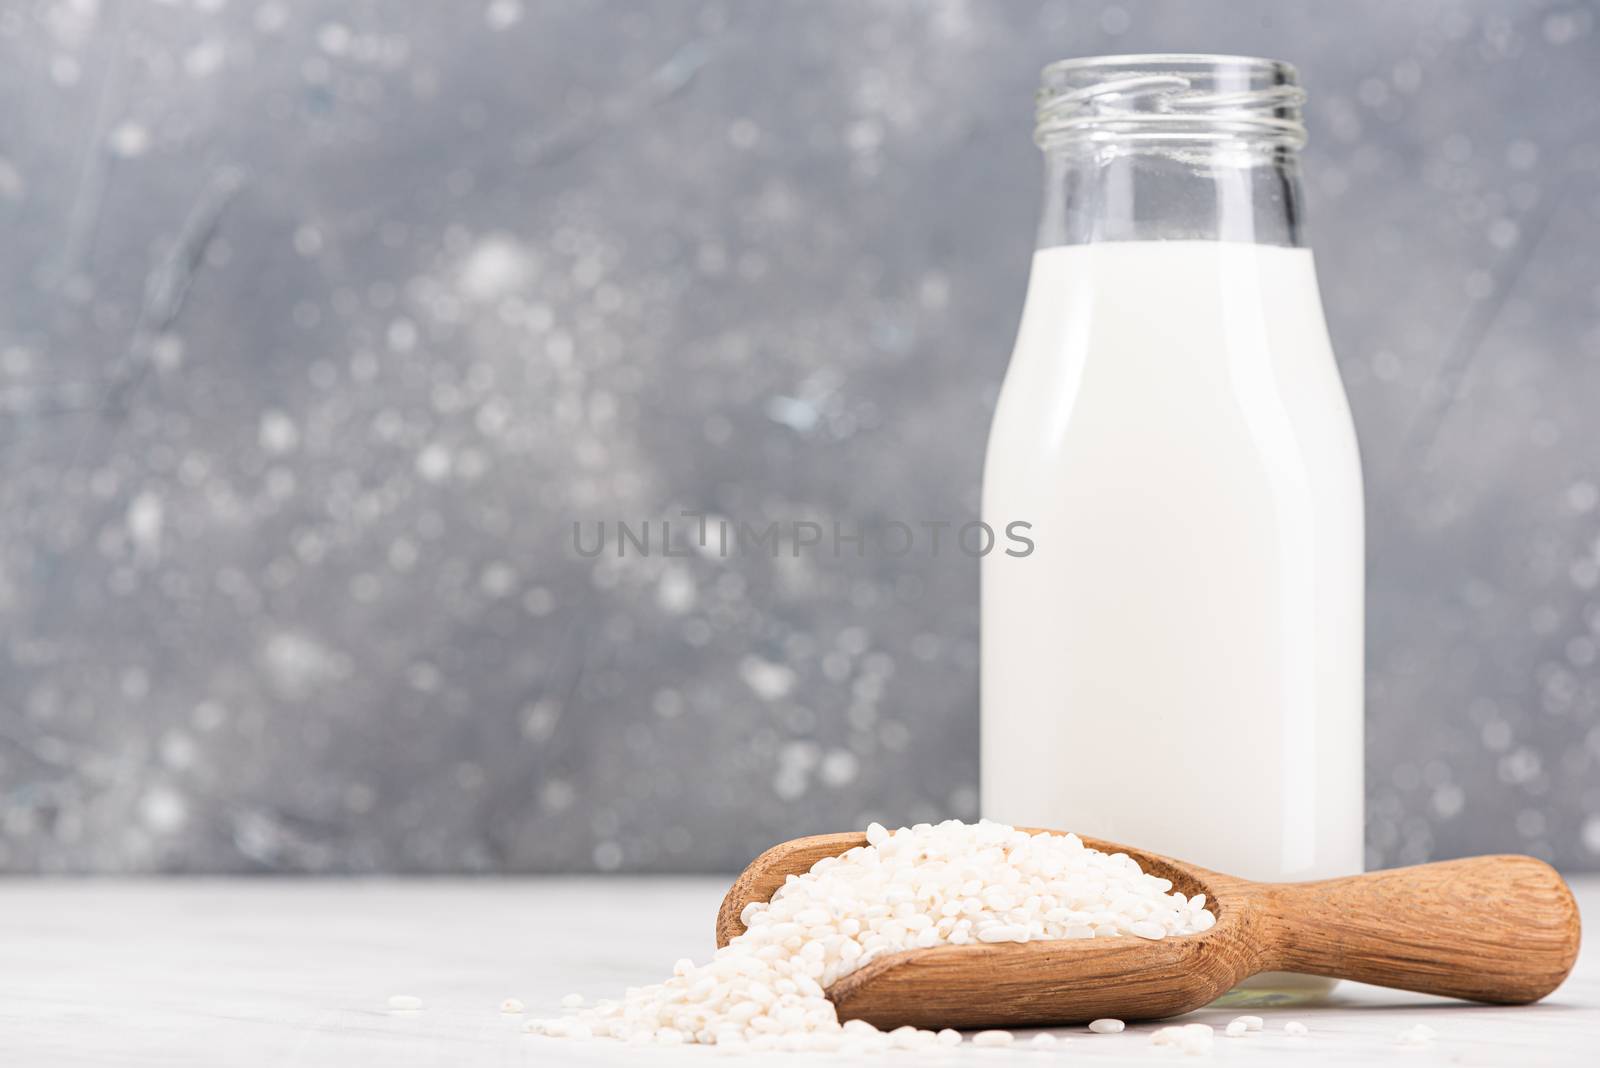 Alternative Non Dairy Rice Milk. Diet and Nutrition Concept by merc67